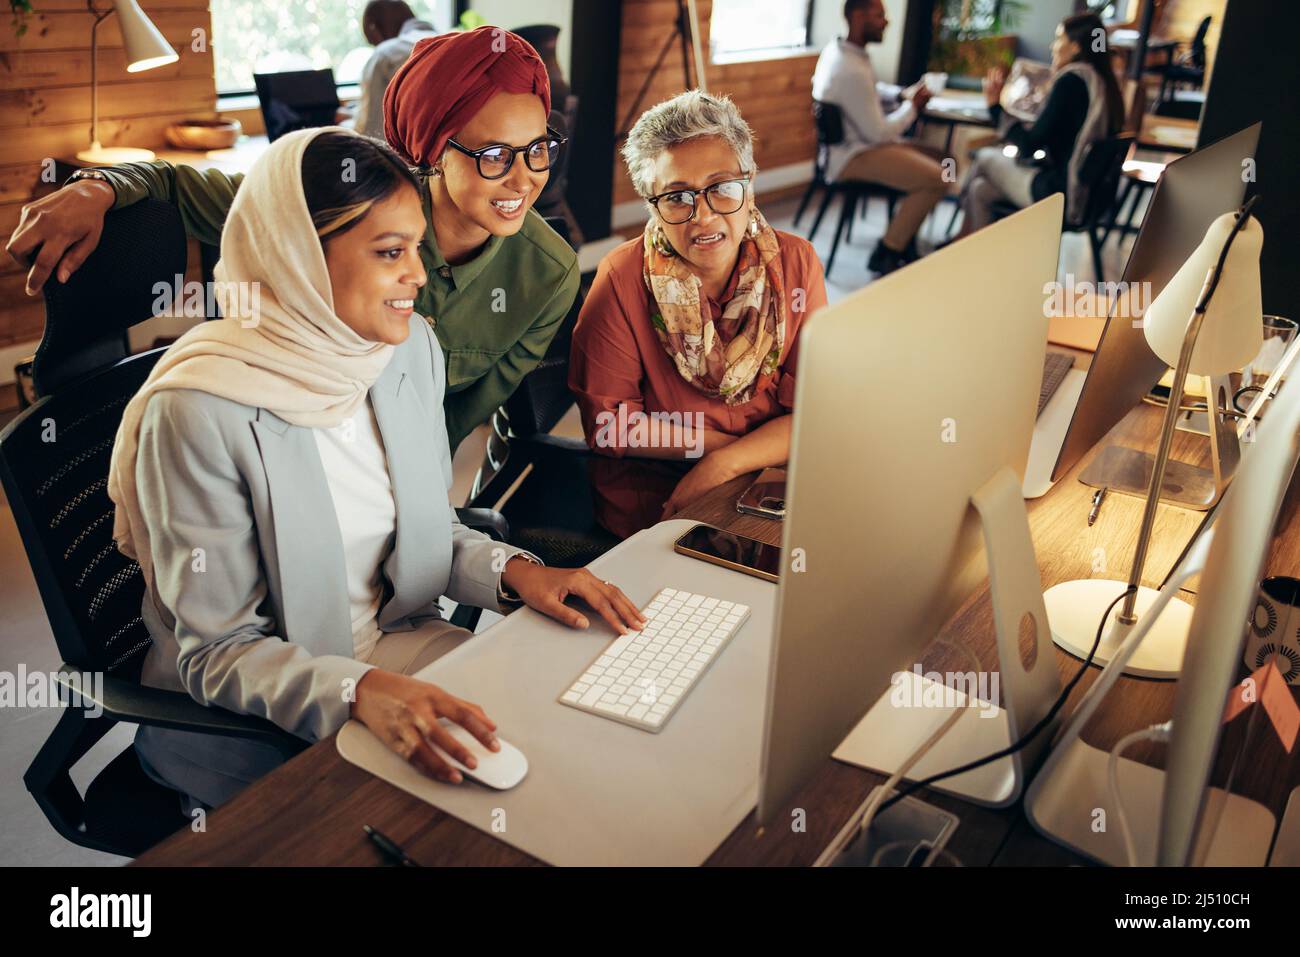 Happy businesswomen working as a team in a modern co-working office. Group of multicultural businesswomen having a discussion while looking at a compu Stock Photo